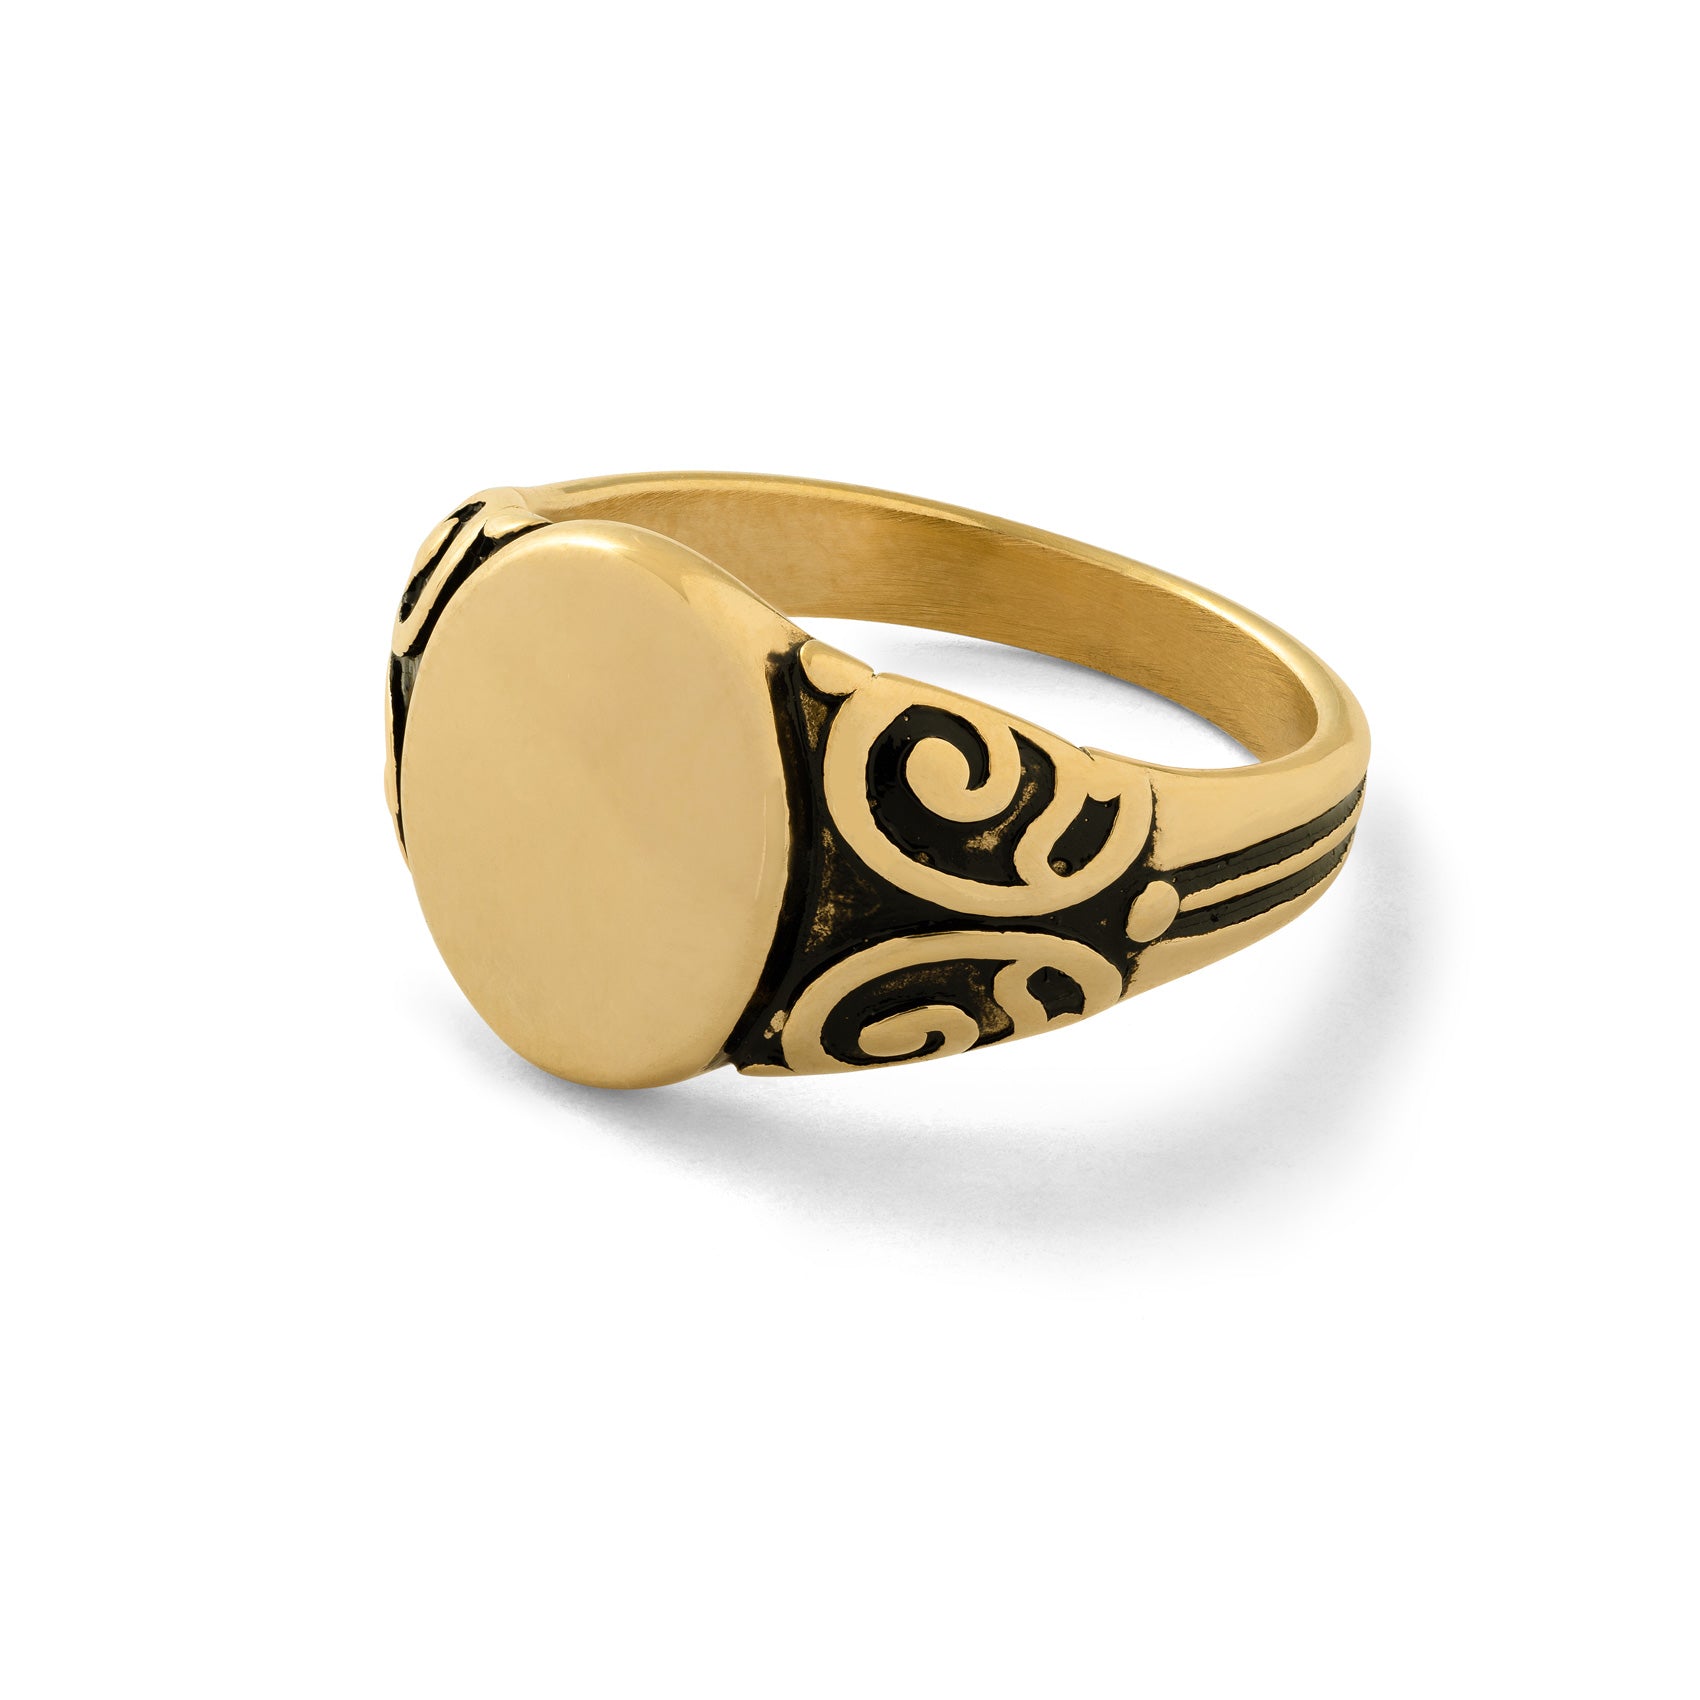 Scroll Signet Ring in gold by STATEMENT COLLECTIVE